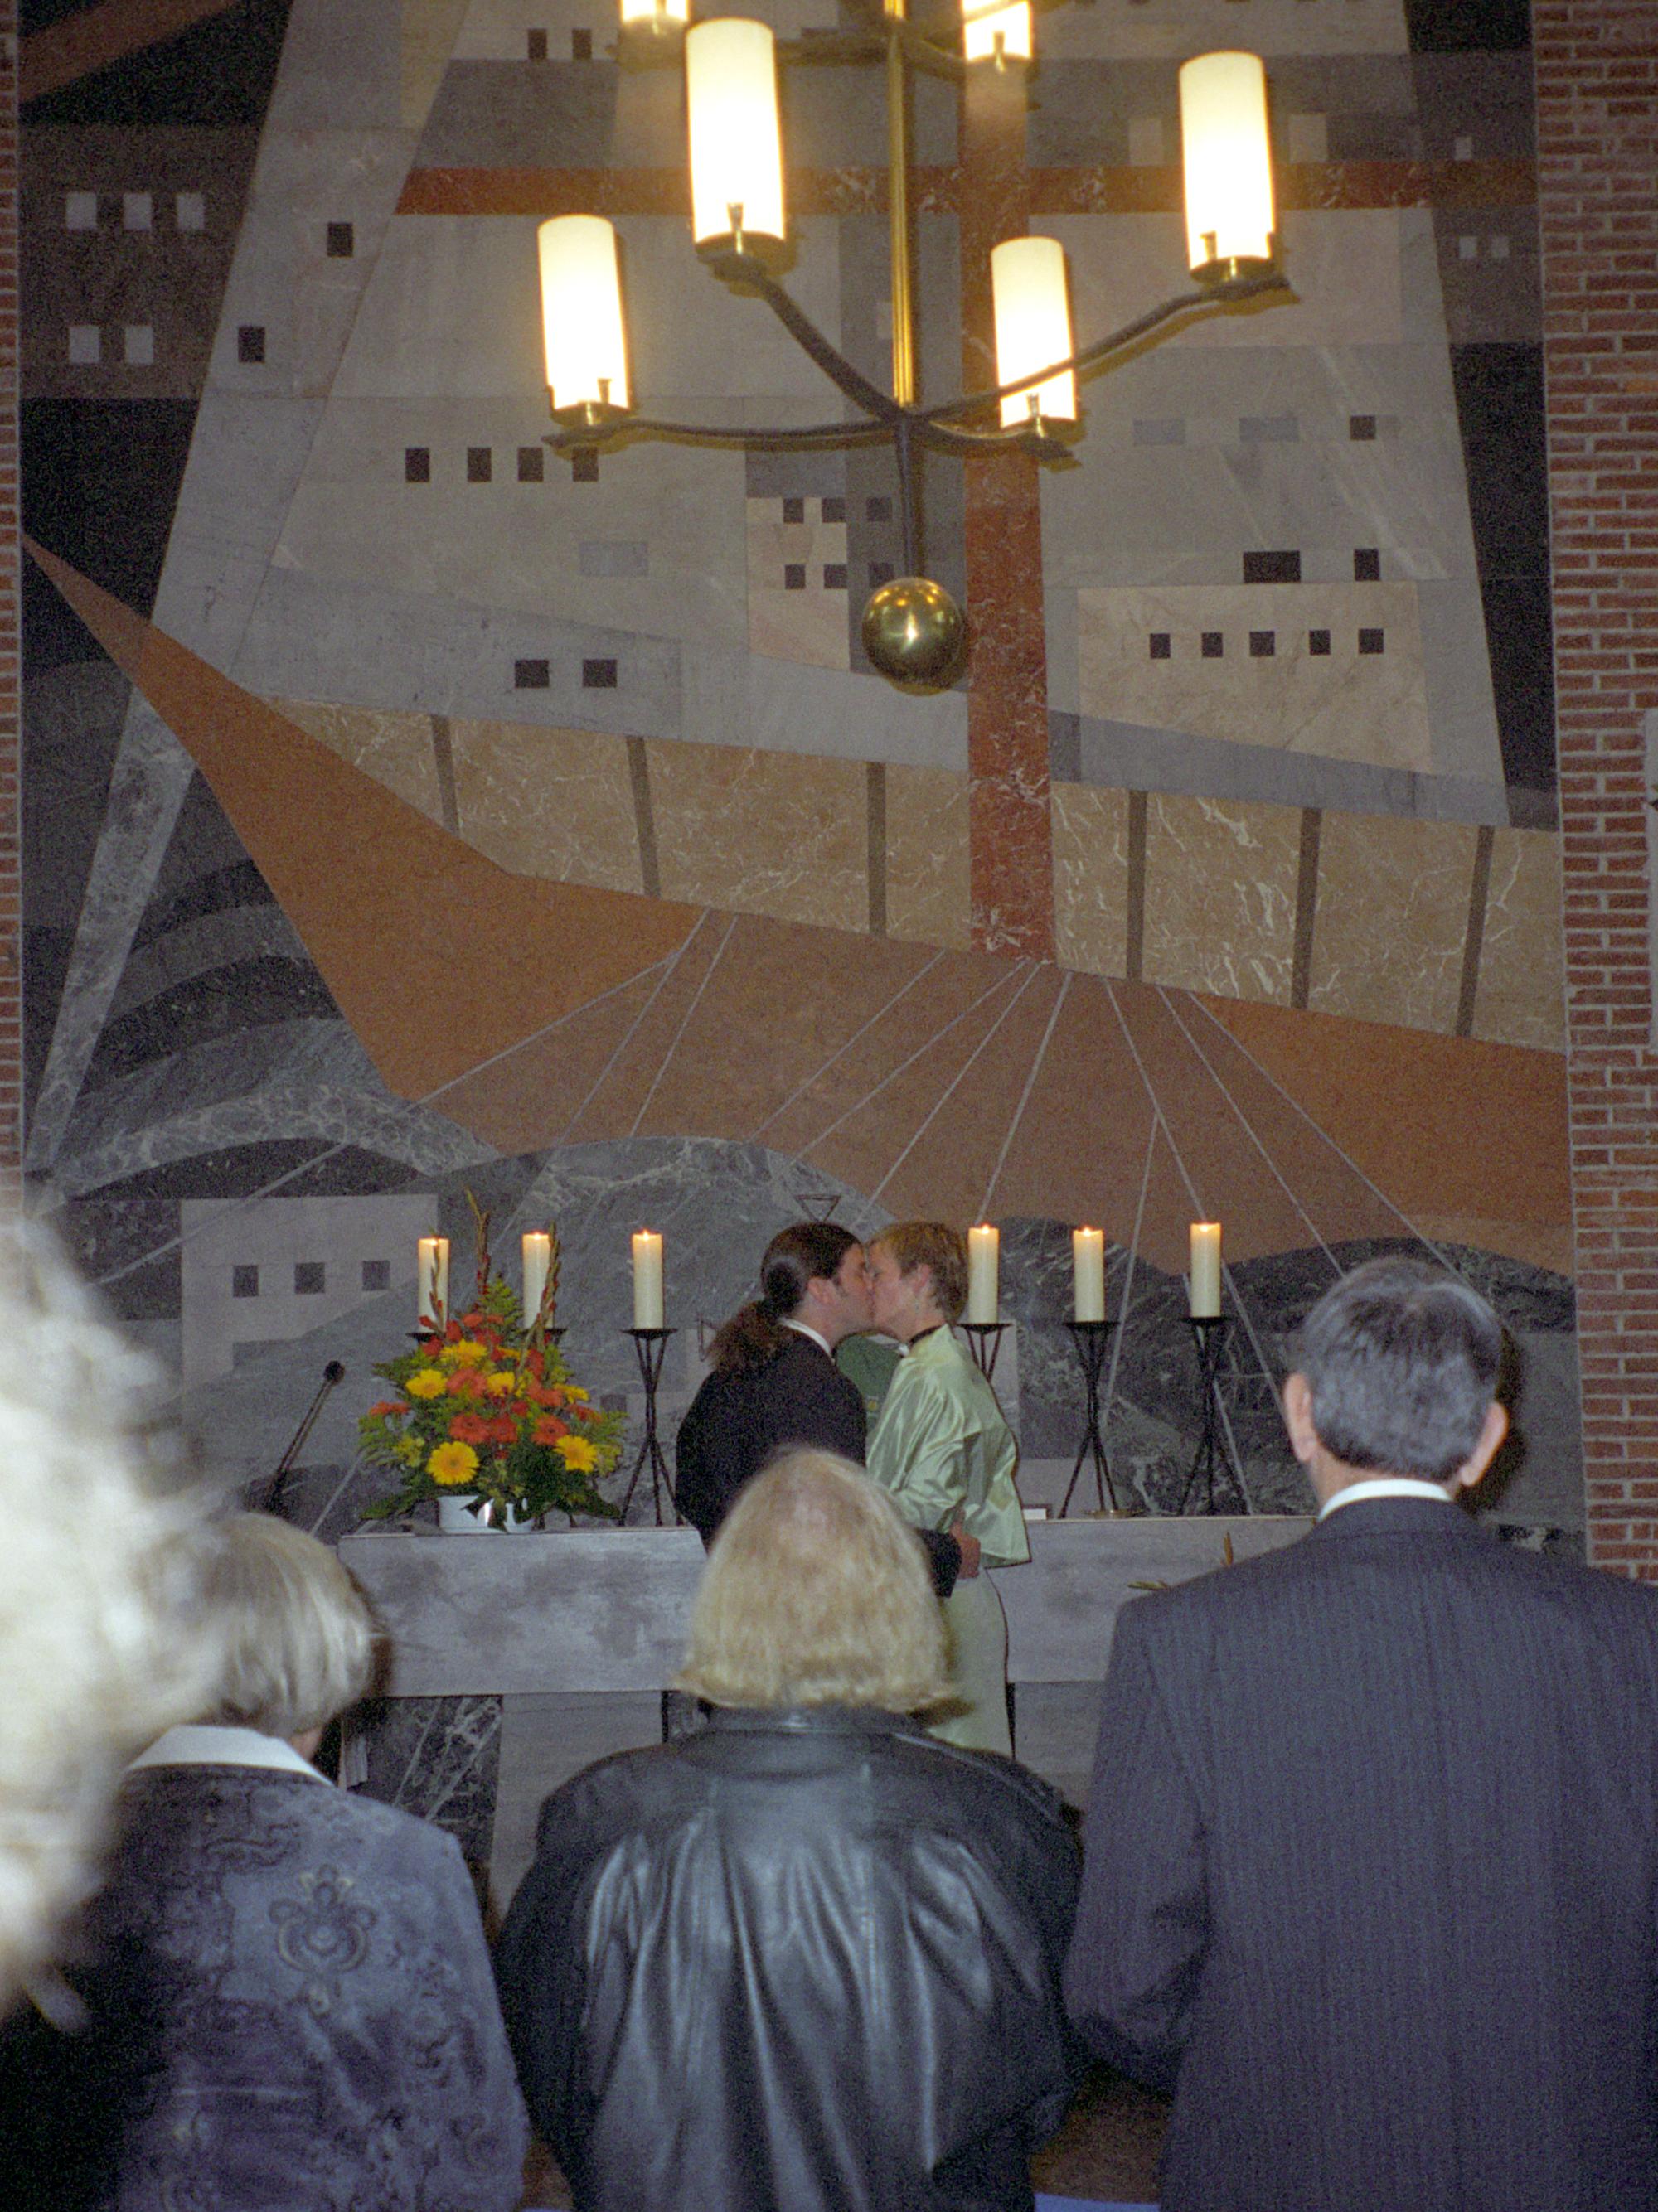 Weddings - At The Alter